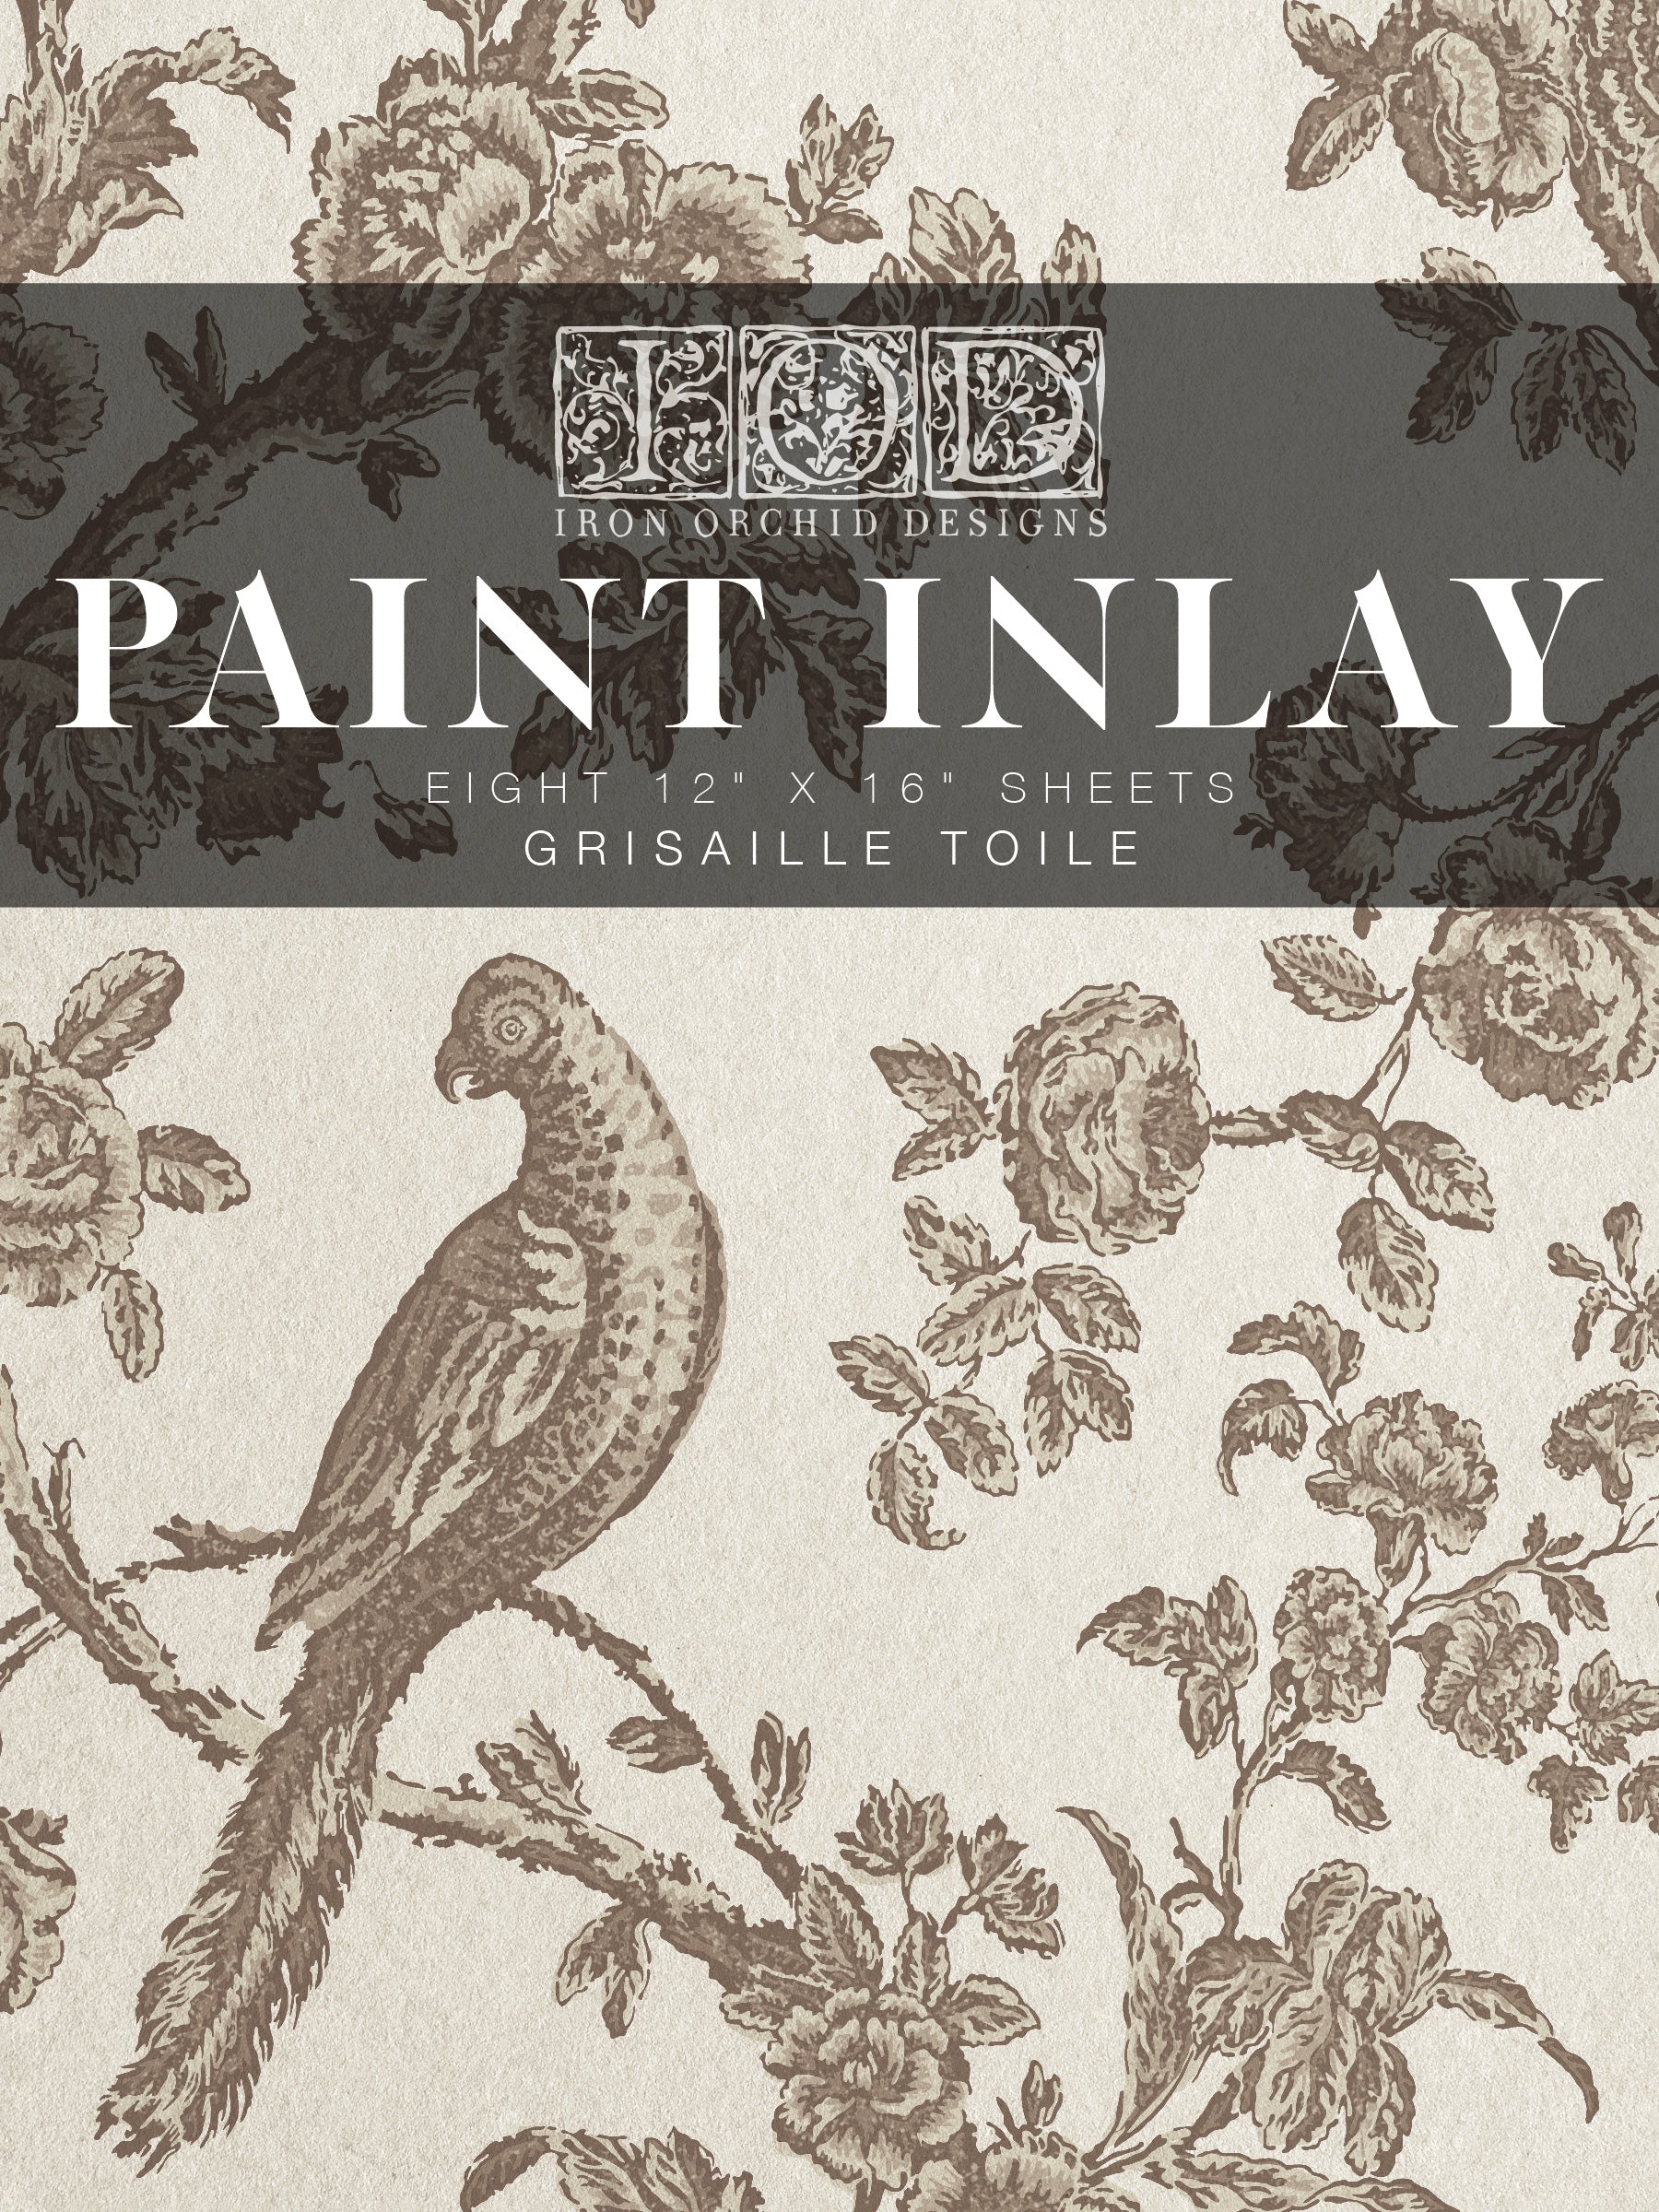 Grisaille Toile IOD Paint Inlay 12x16 Pad™ Iron Orchid Designs, LLC.